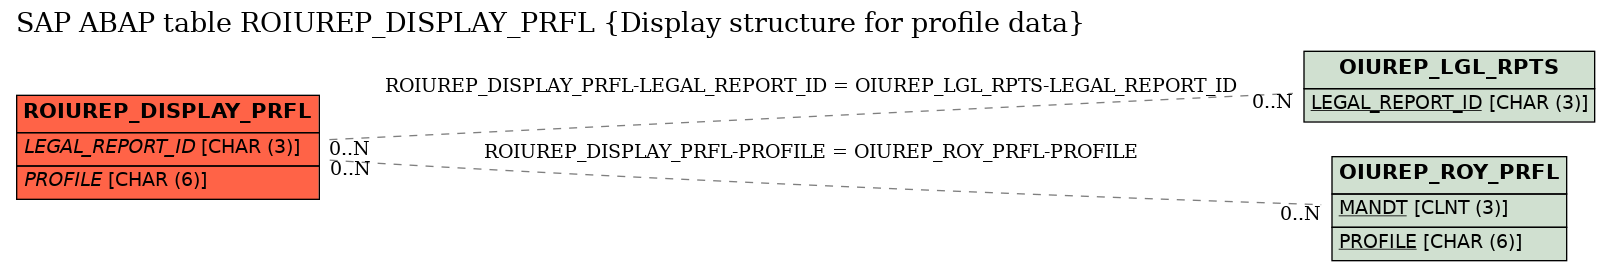 E-R Diagram for table ROIUREP_DISPLAY_PRFL (Display structure for profile data)